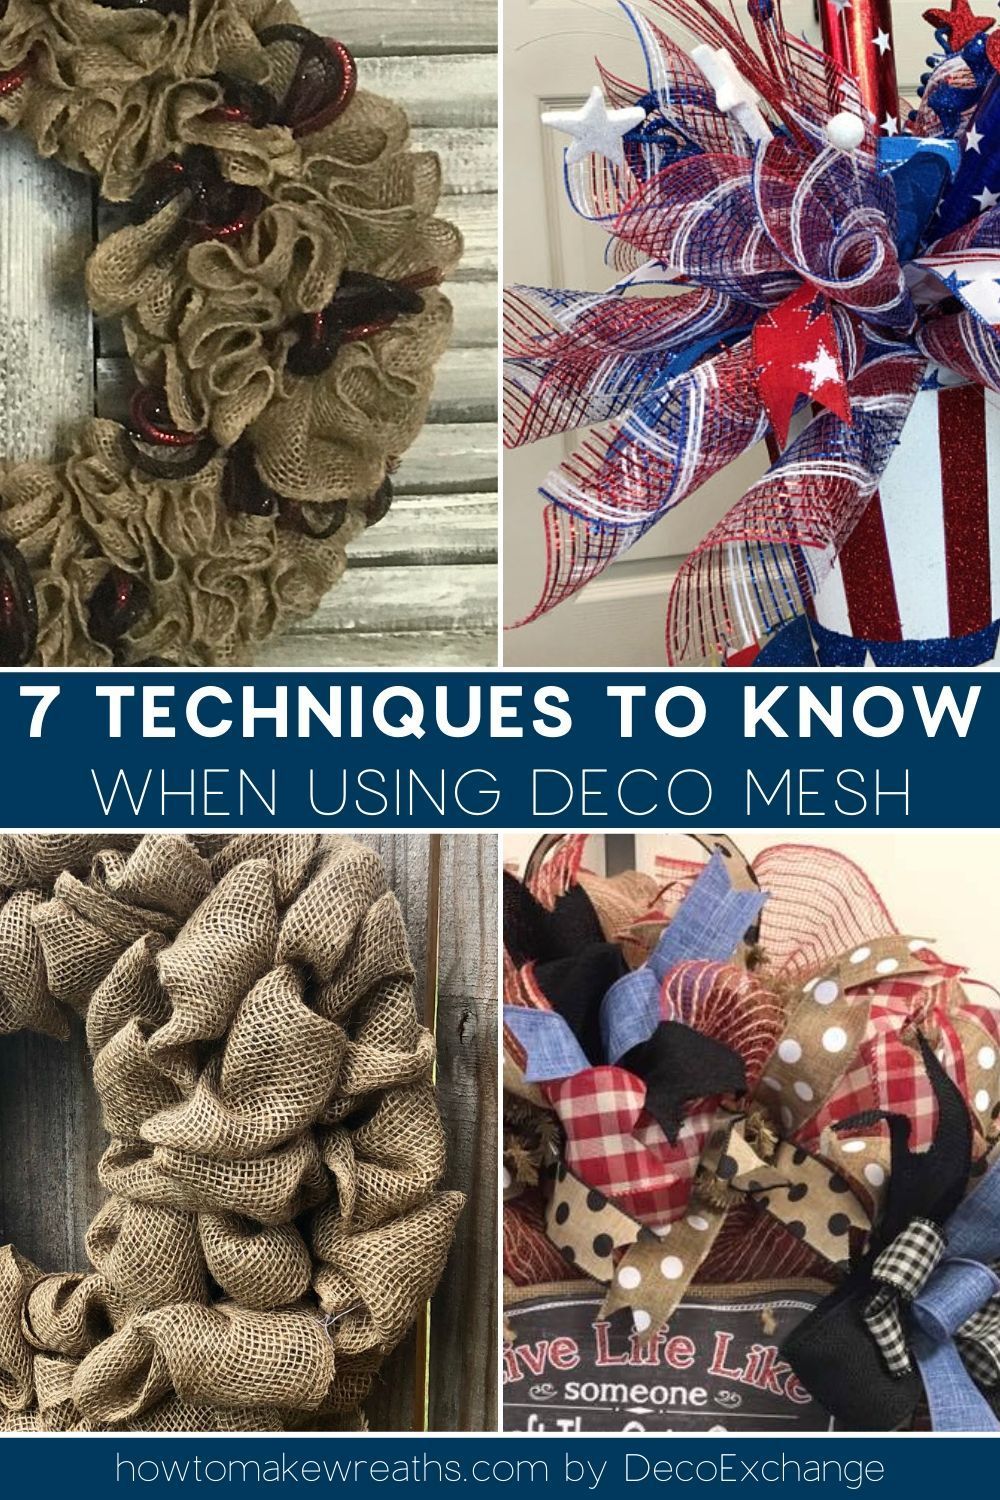 How to Make a Wreath with Mesh - 7 Techniques to Know - How to Make Wreaths - Wreath Making for Craftpreneurs -   21 holiday Wreaths mesh ideas